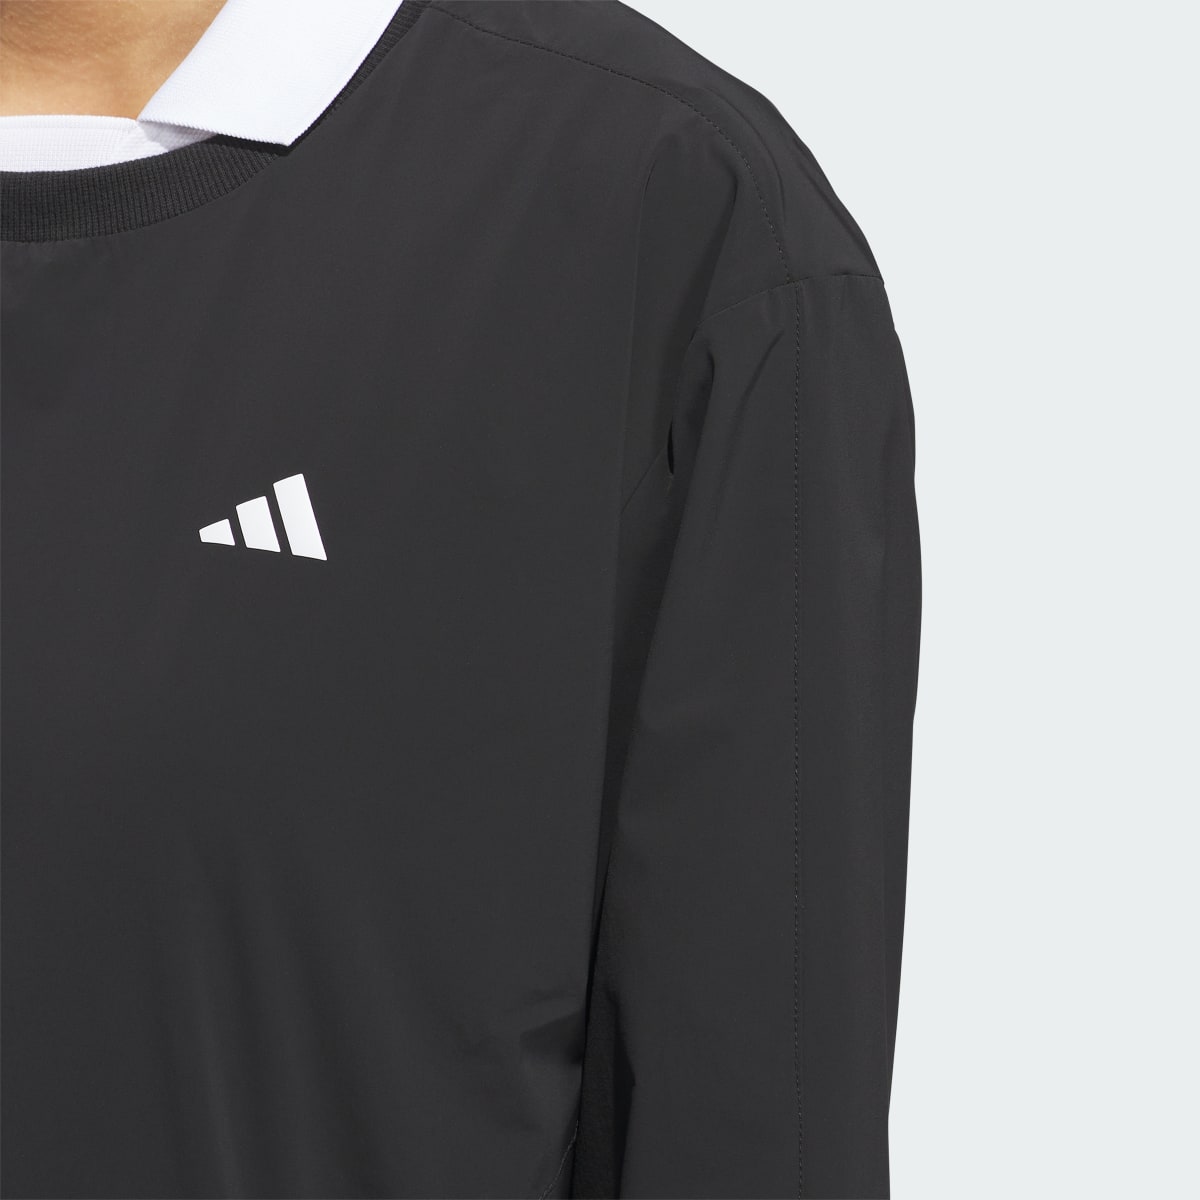 Adidas Ultimate365 Tour WIND.RDY Pullover Sweatshirt. 6